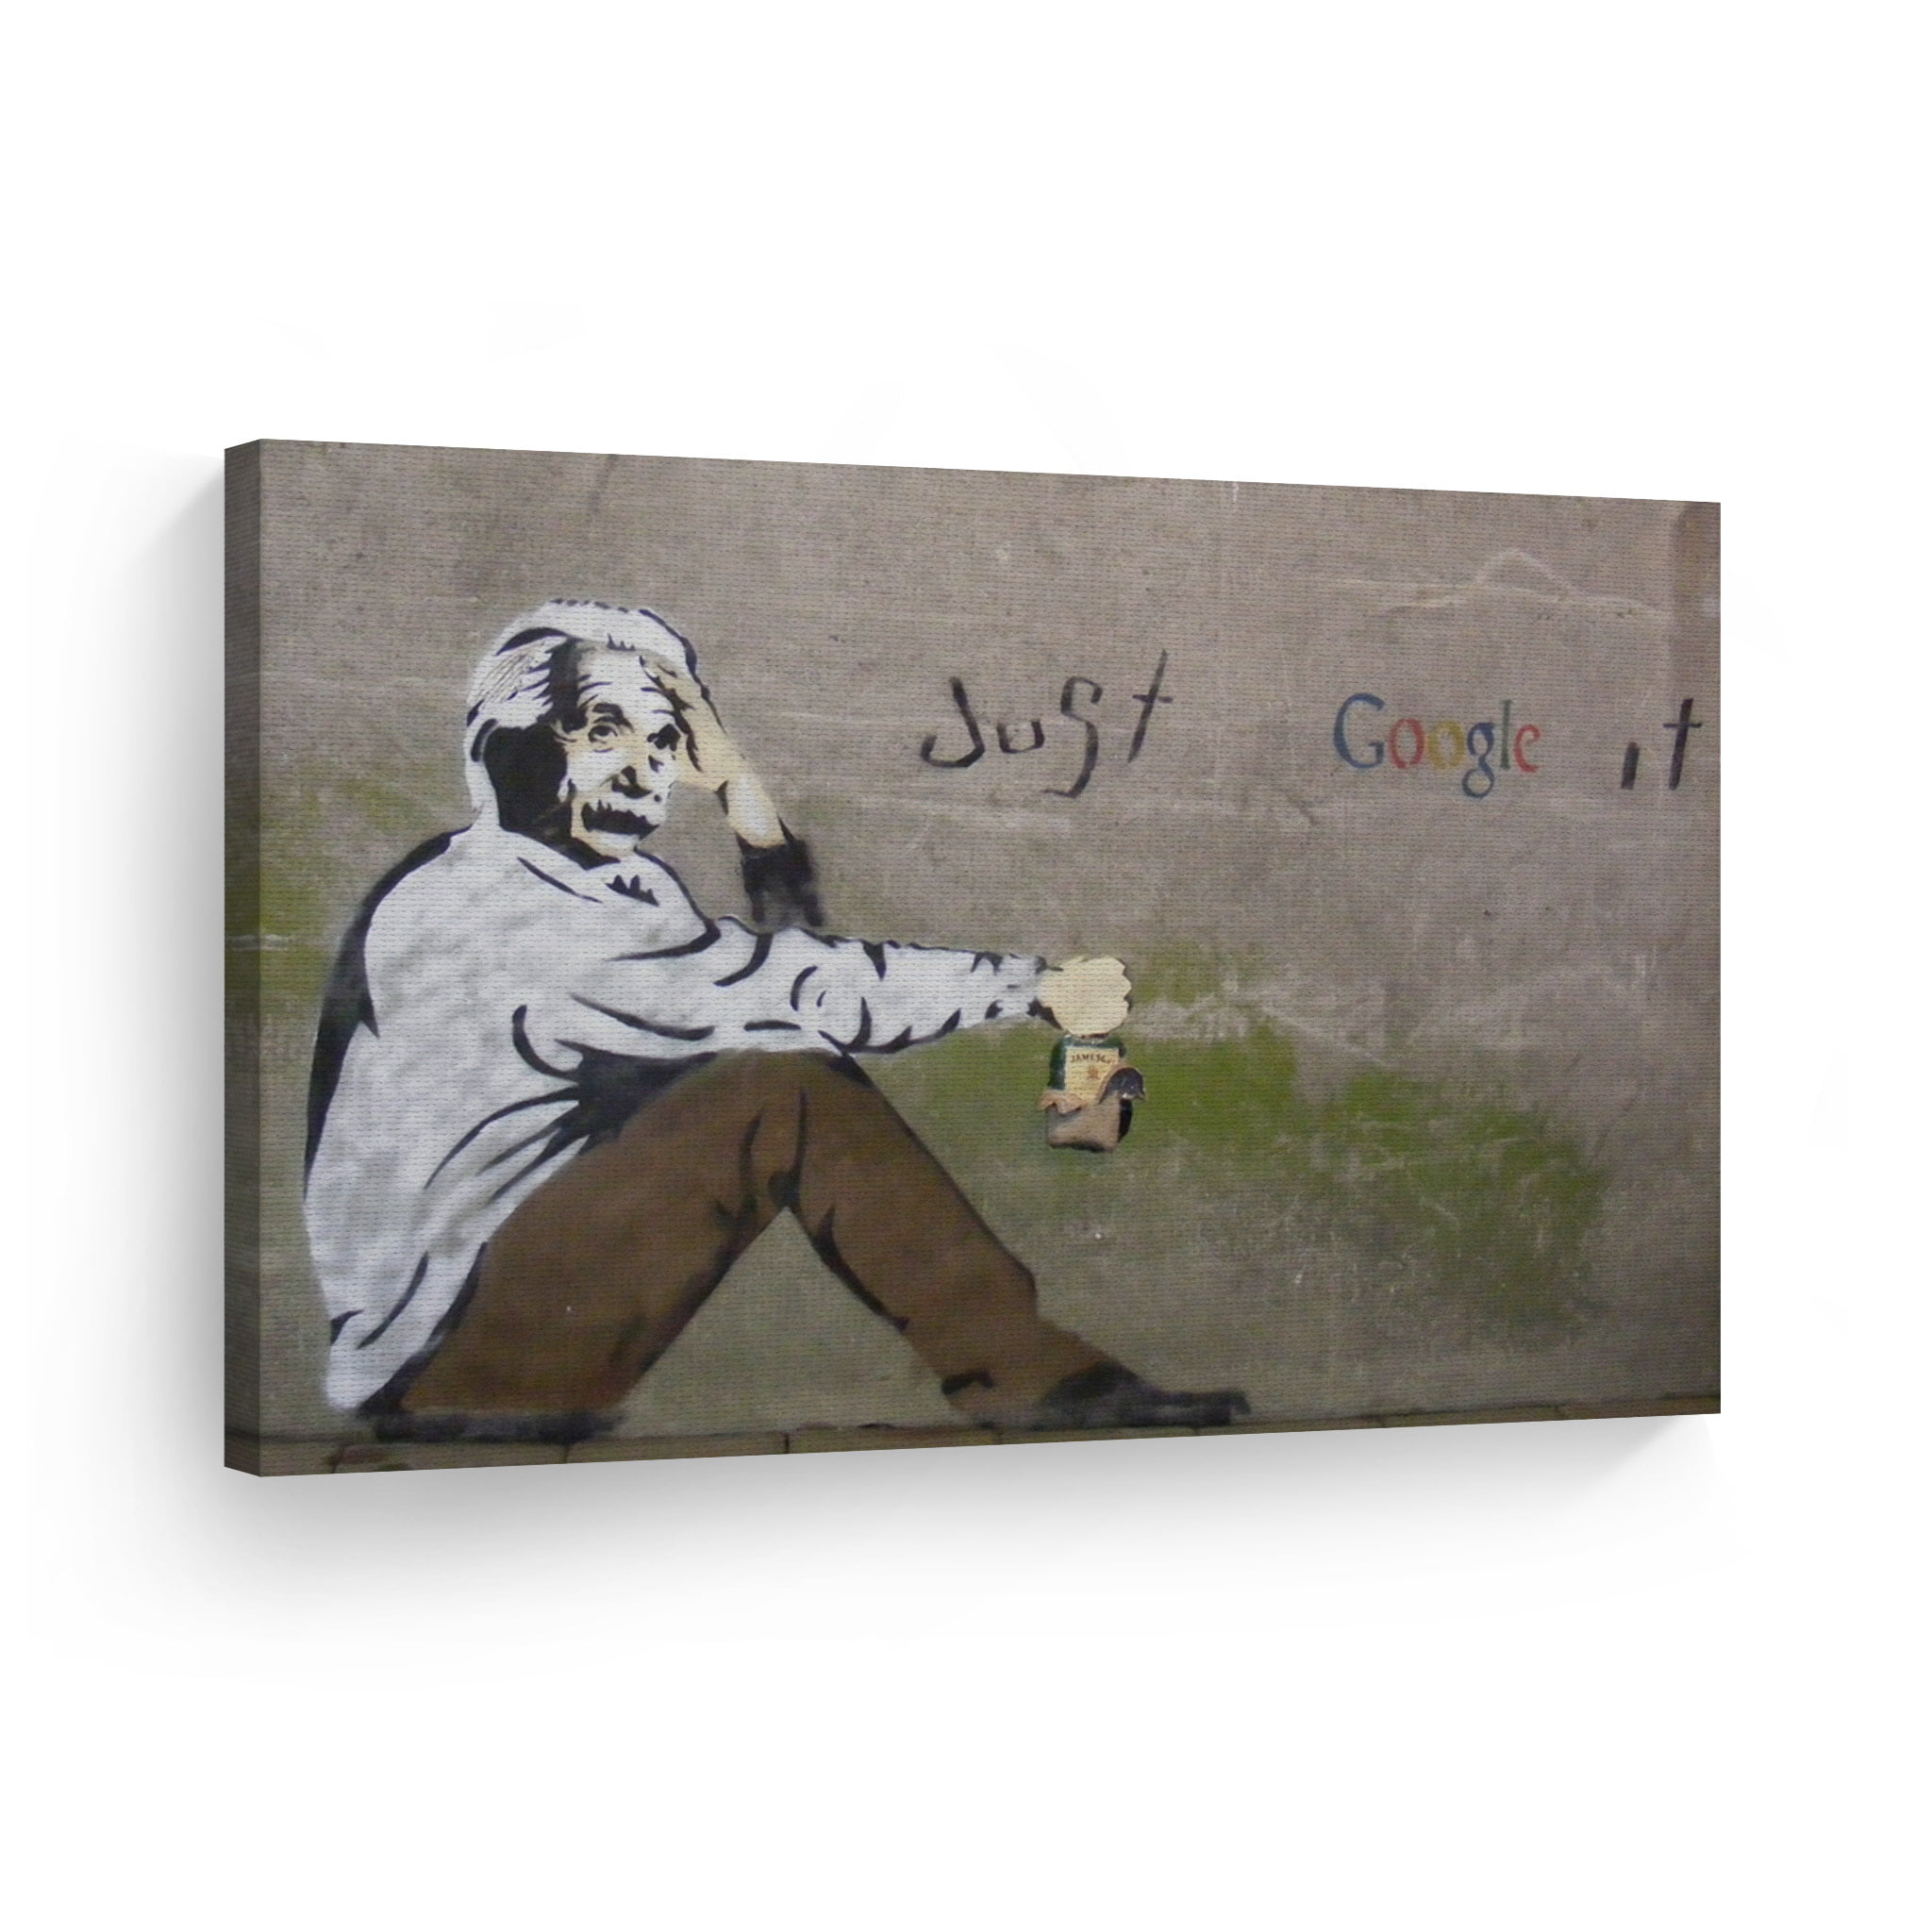 BANKSY JUST GOOGLE IT PHOTO/PICTURE PRINT ON FRAMED CANVAS WALL ART DECOR 